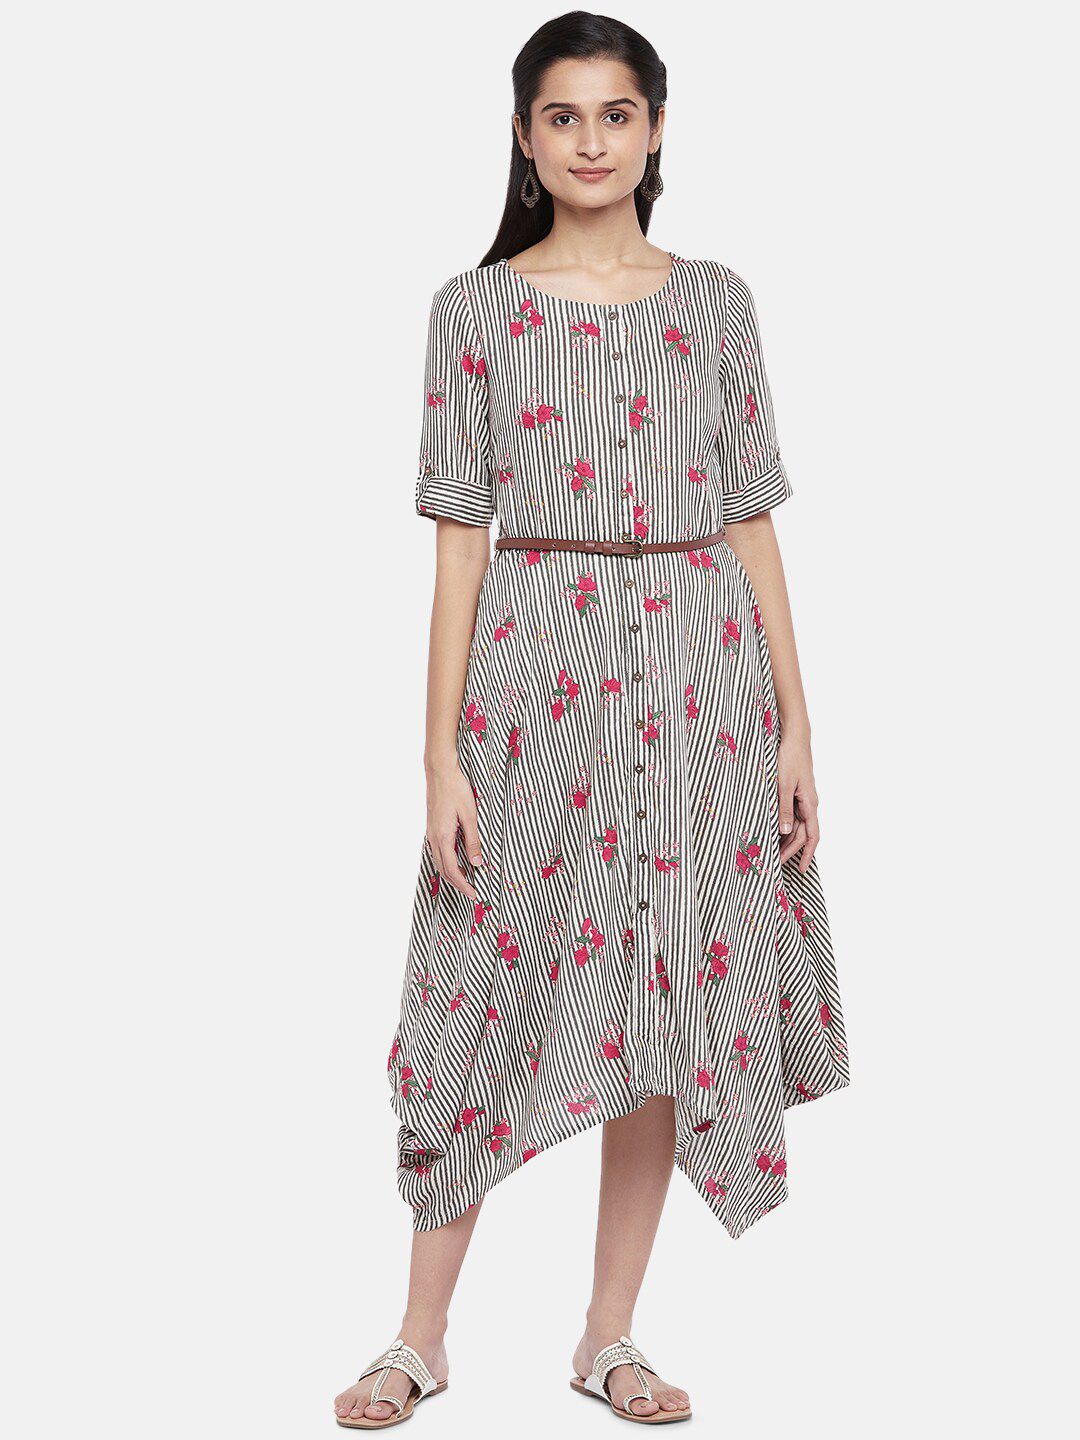 AKKRITI BY PANTALOONS Off White & Black Floral A-Line Midi Dress Price in India